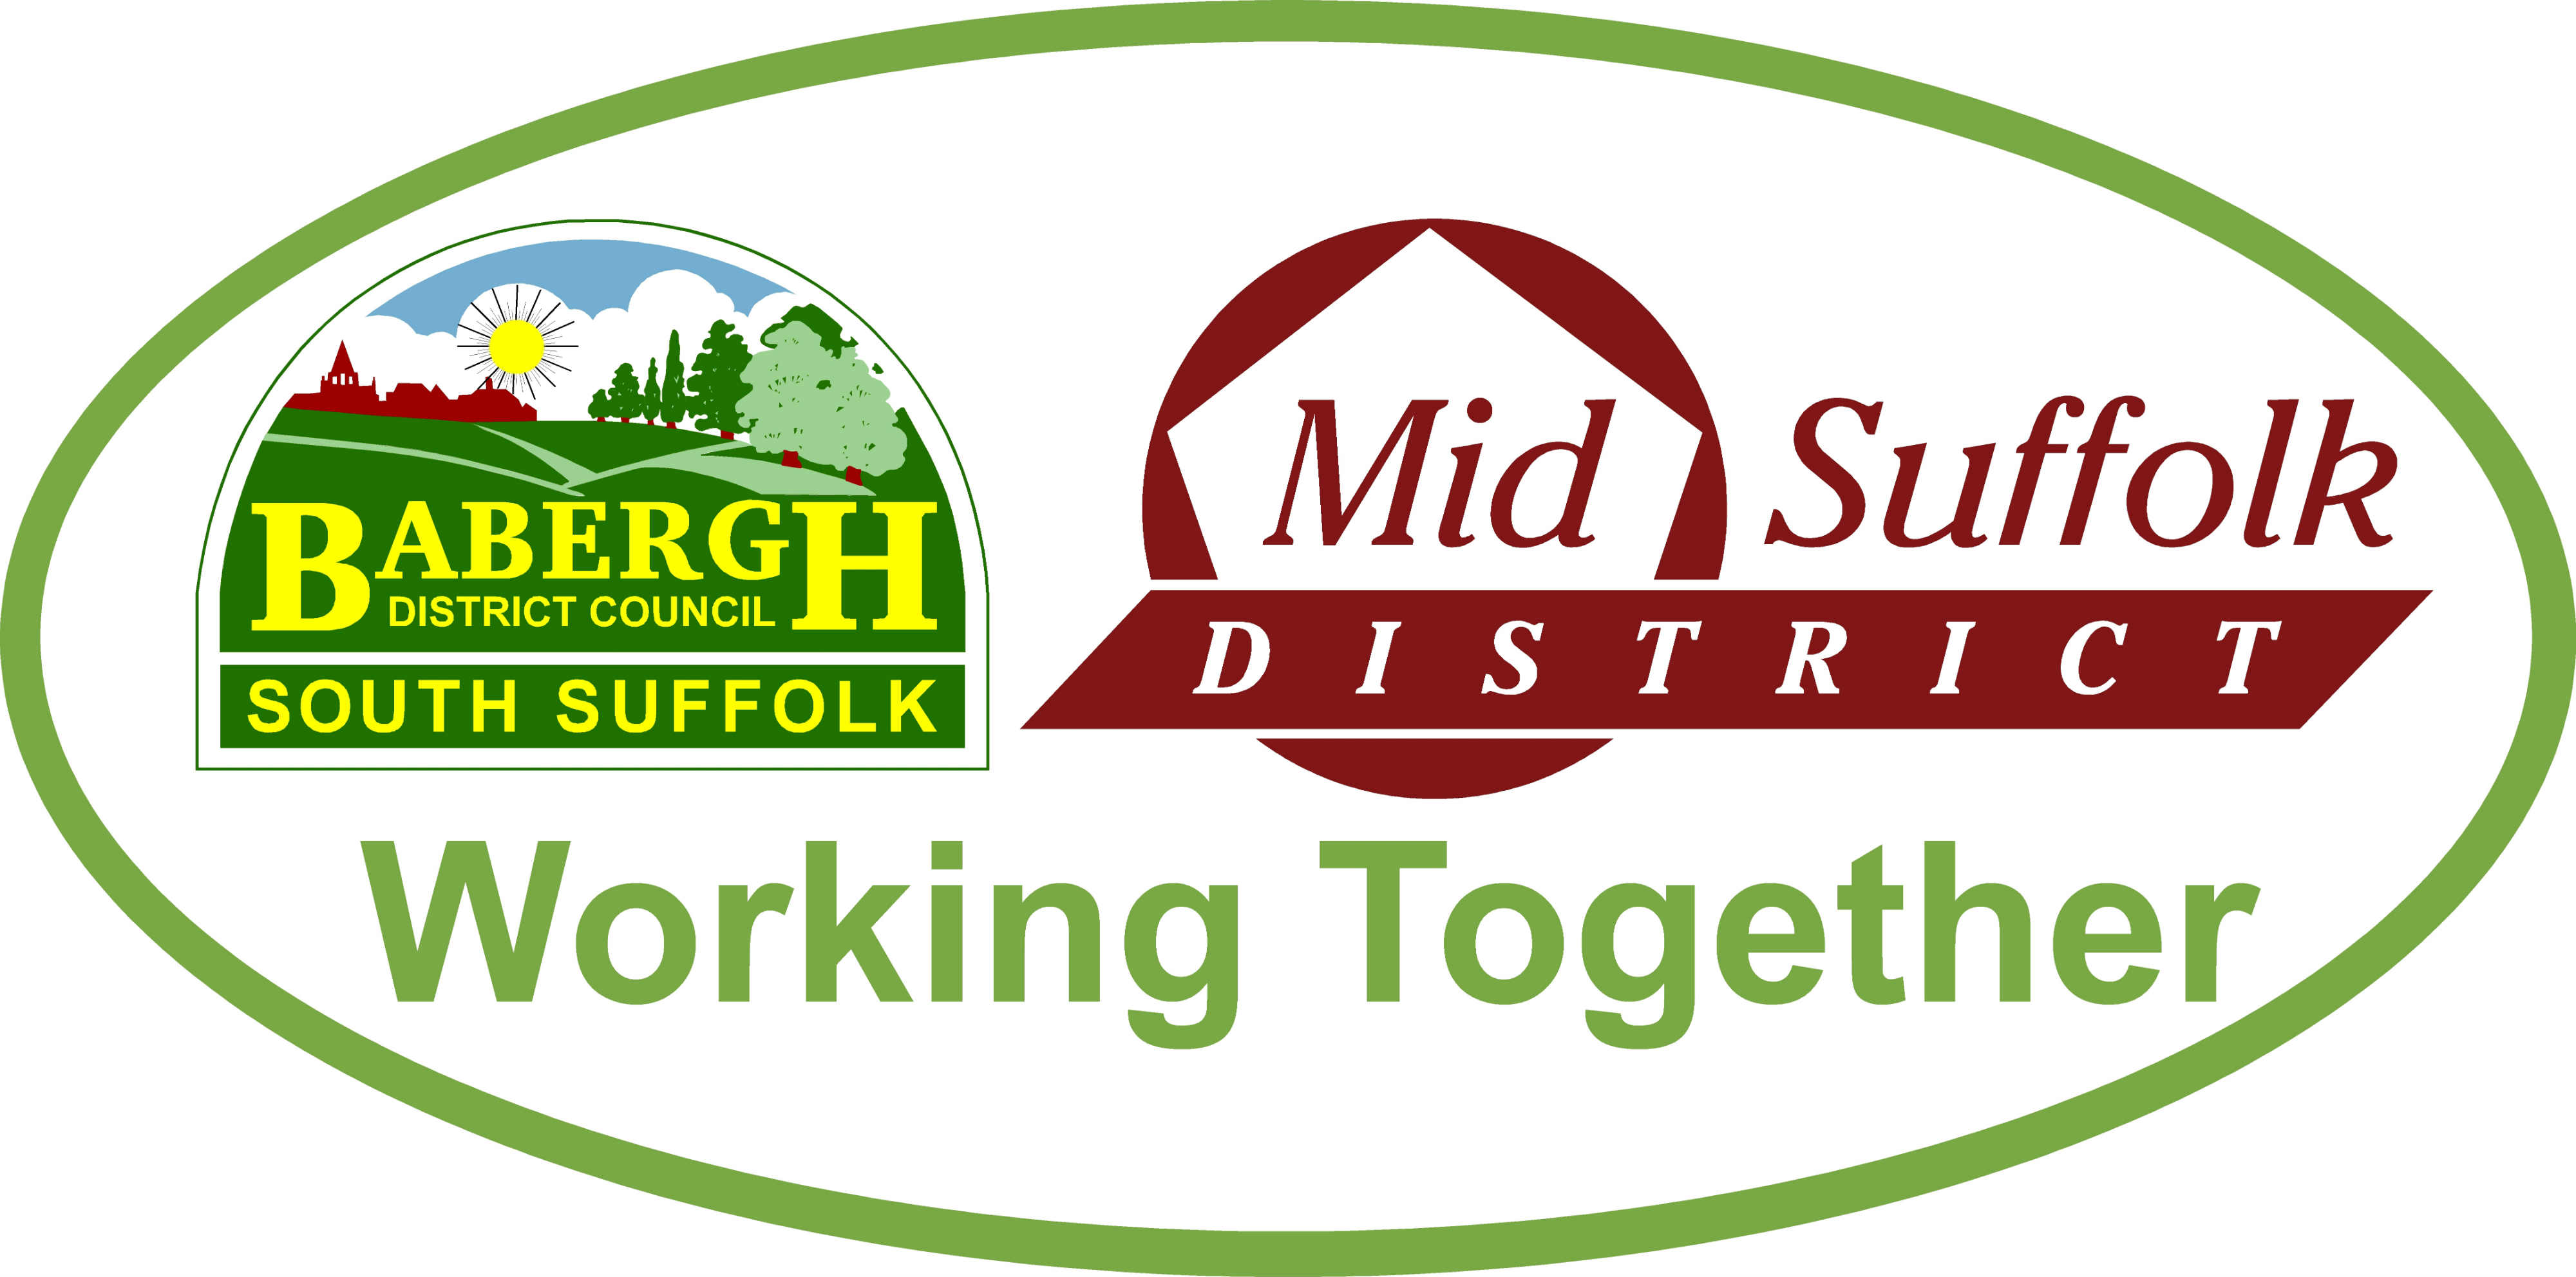 Babergh District Council and Mid Suffolk District Council